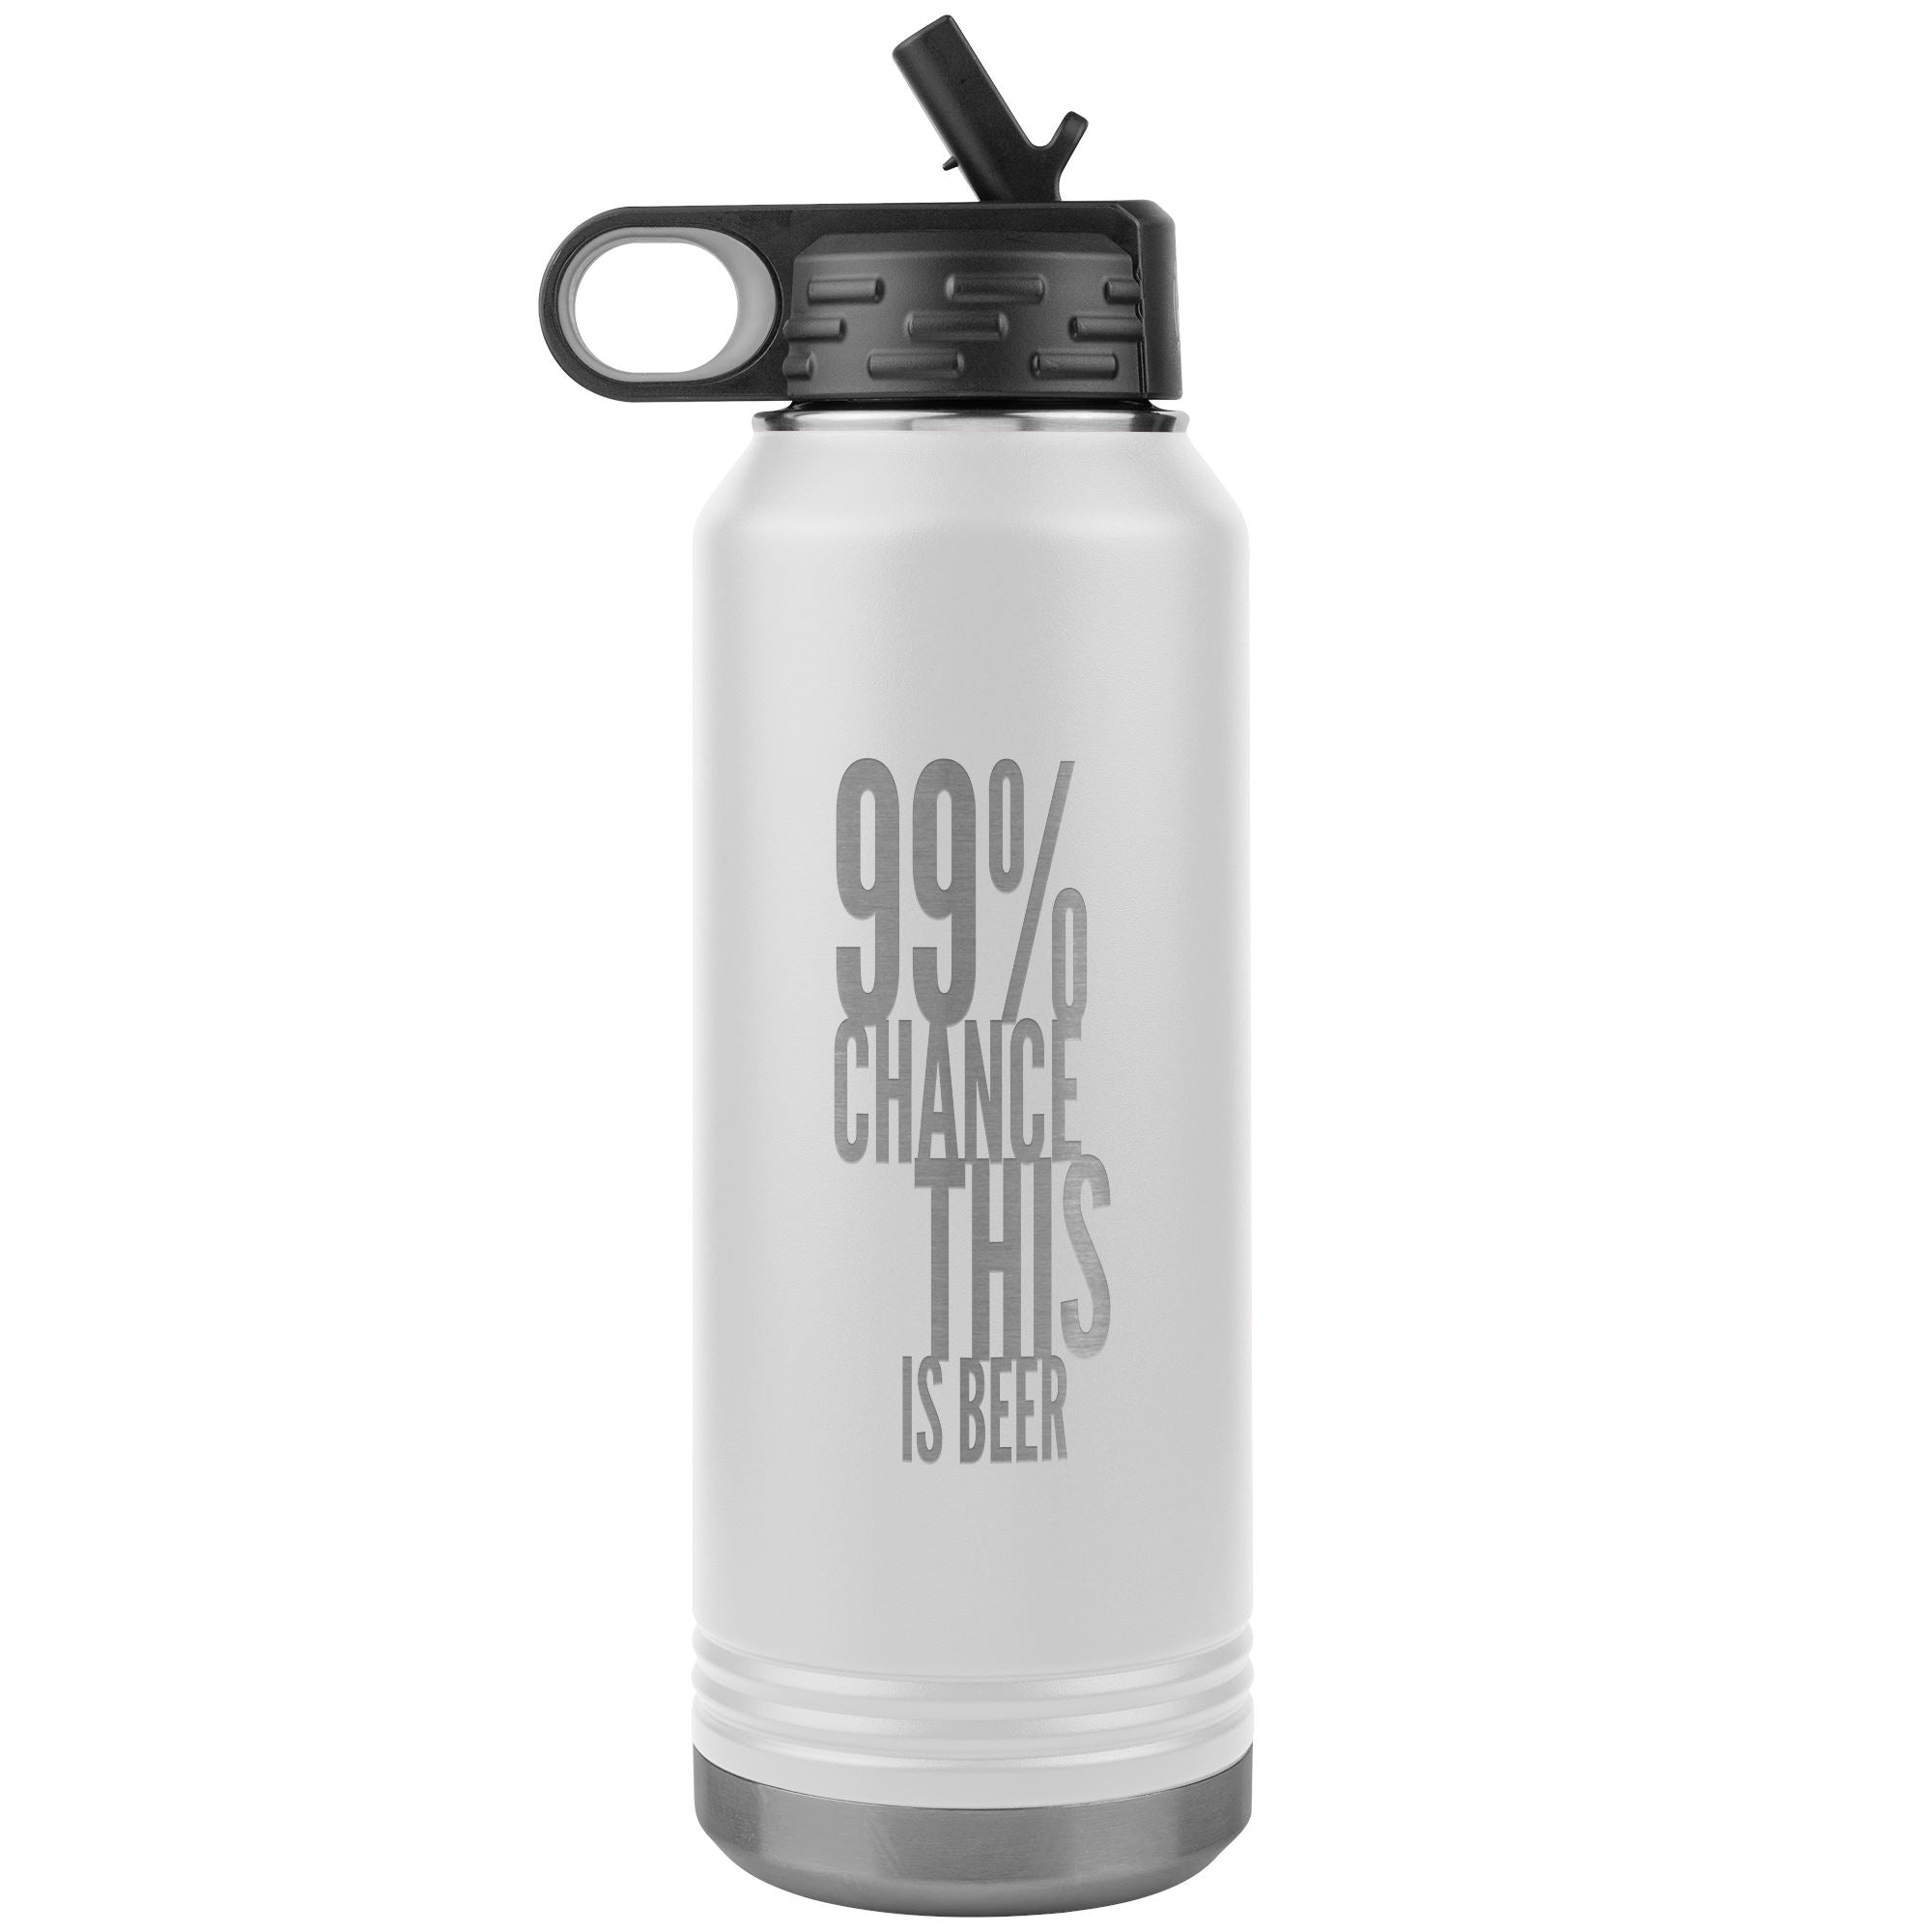 99 Percent Chance This Is Beer 32oz Tumbler Tumblers White 